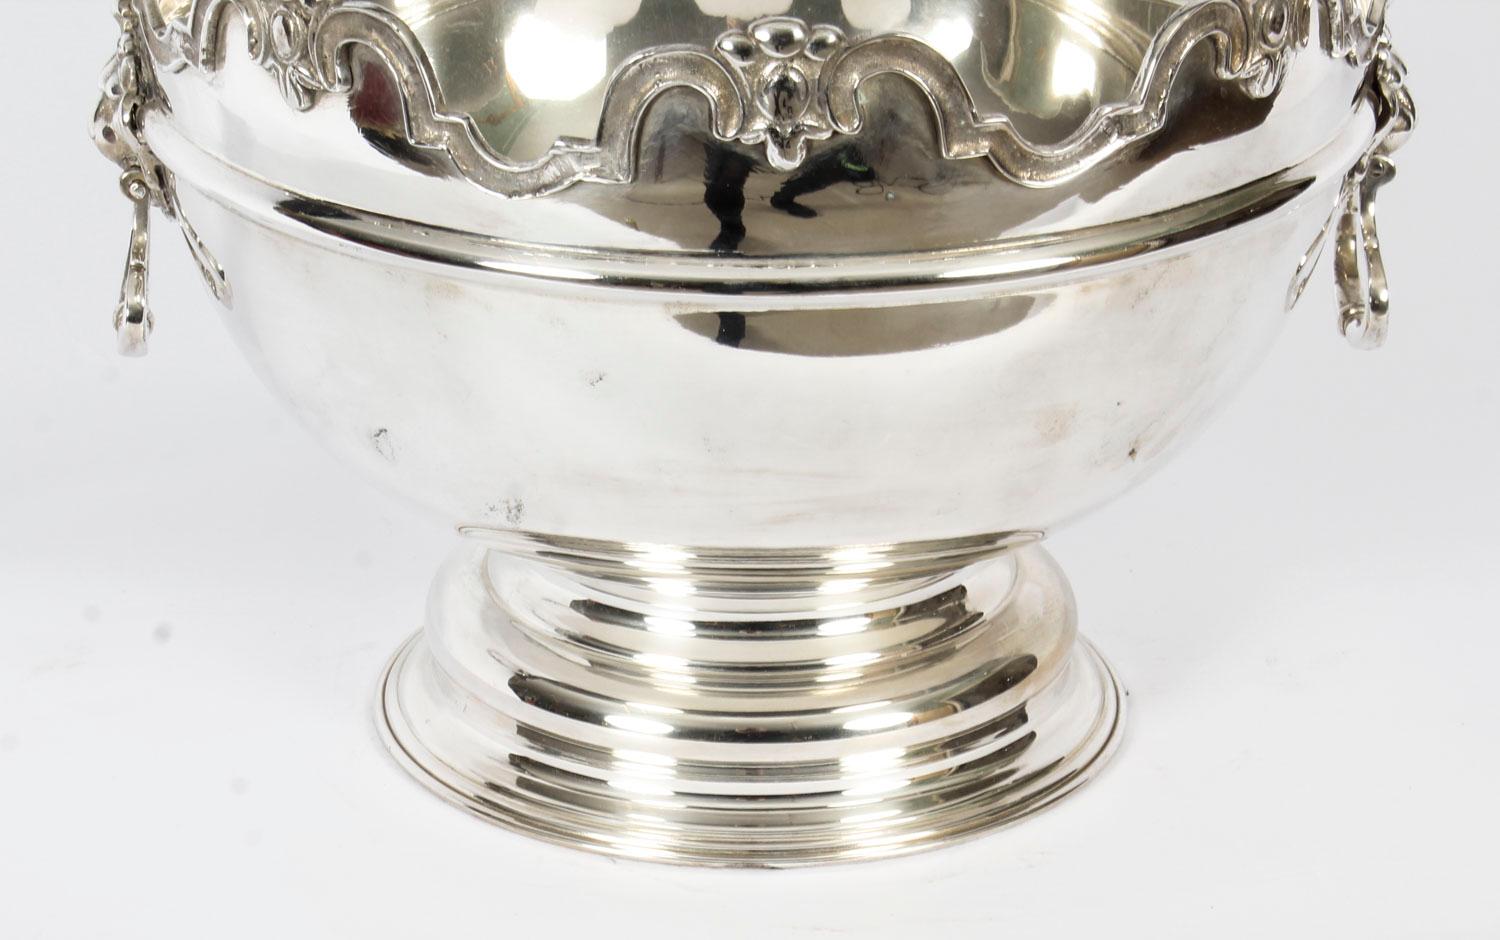 Vintage Silver Plated Monteith Punch Bowl Cooler, 20th Century 1